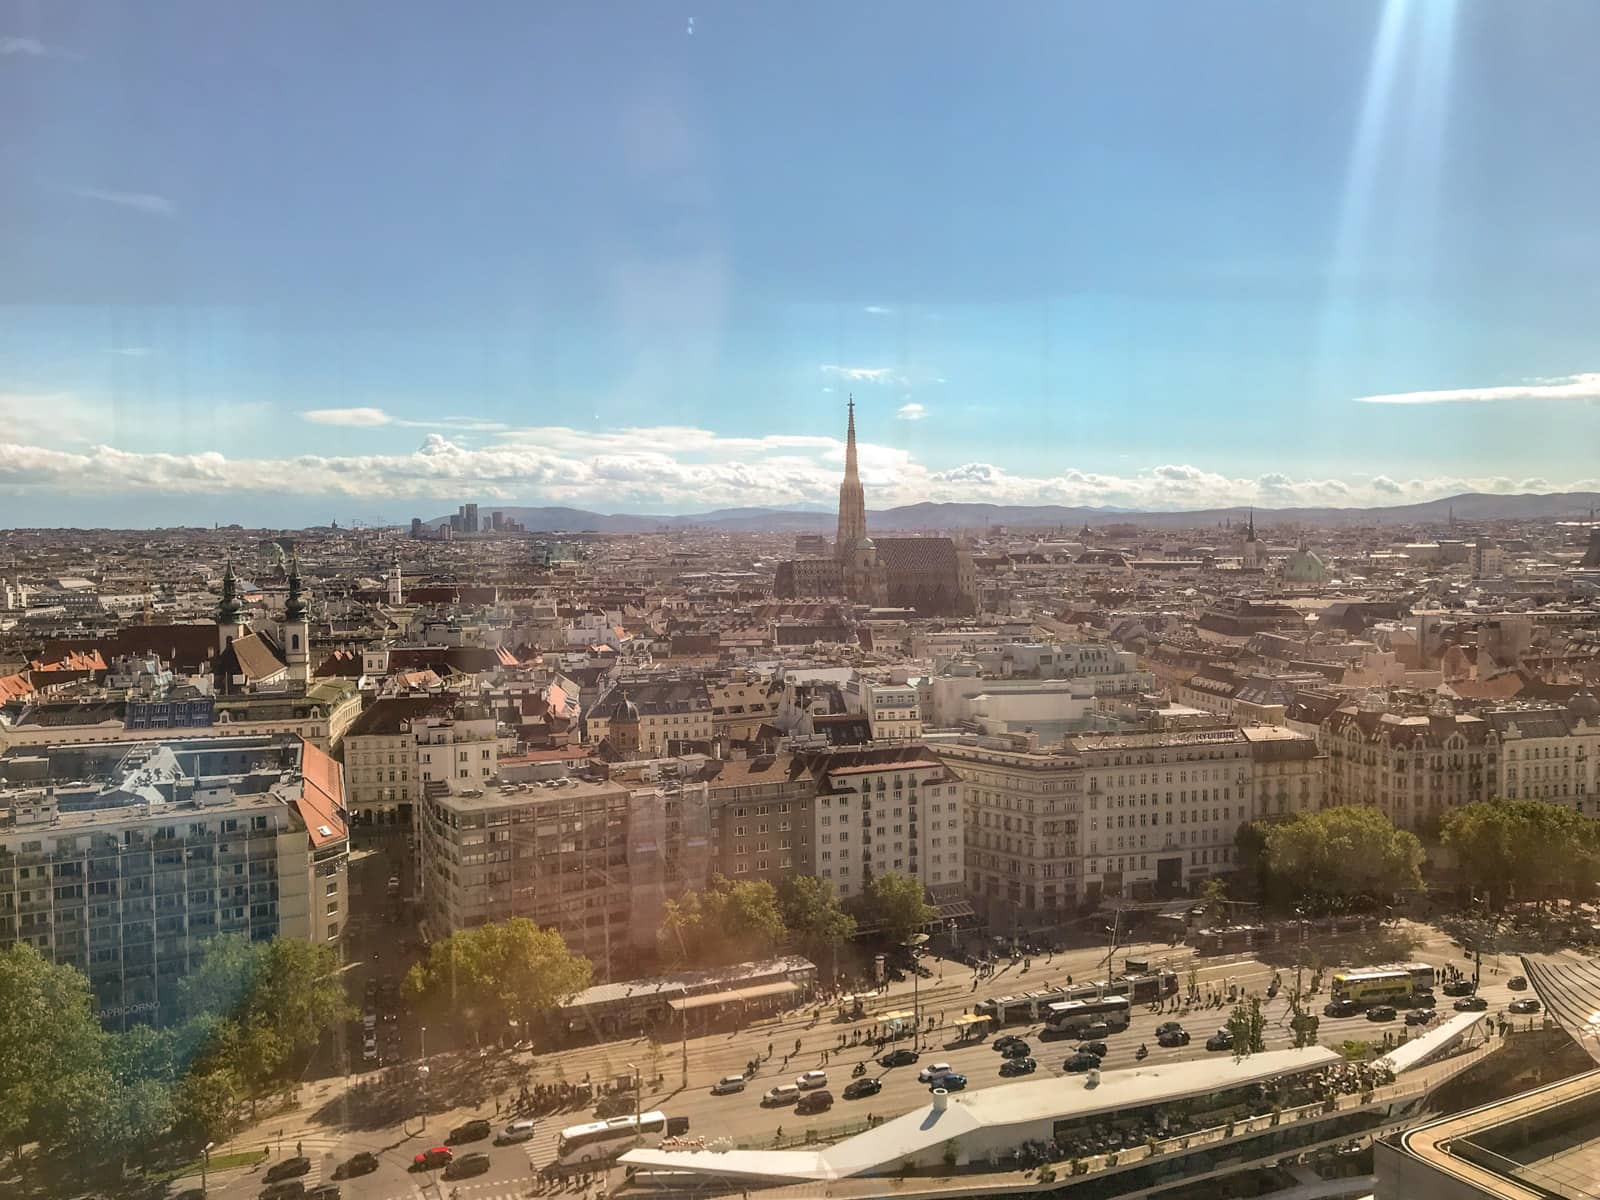 A landscape view of the city of Vienna as seen from the glass window of a hotel